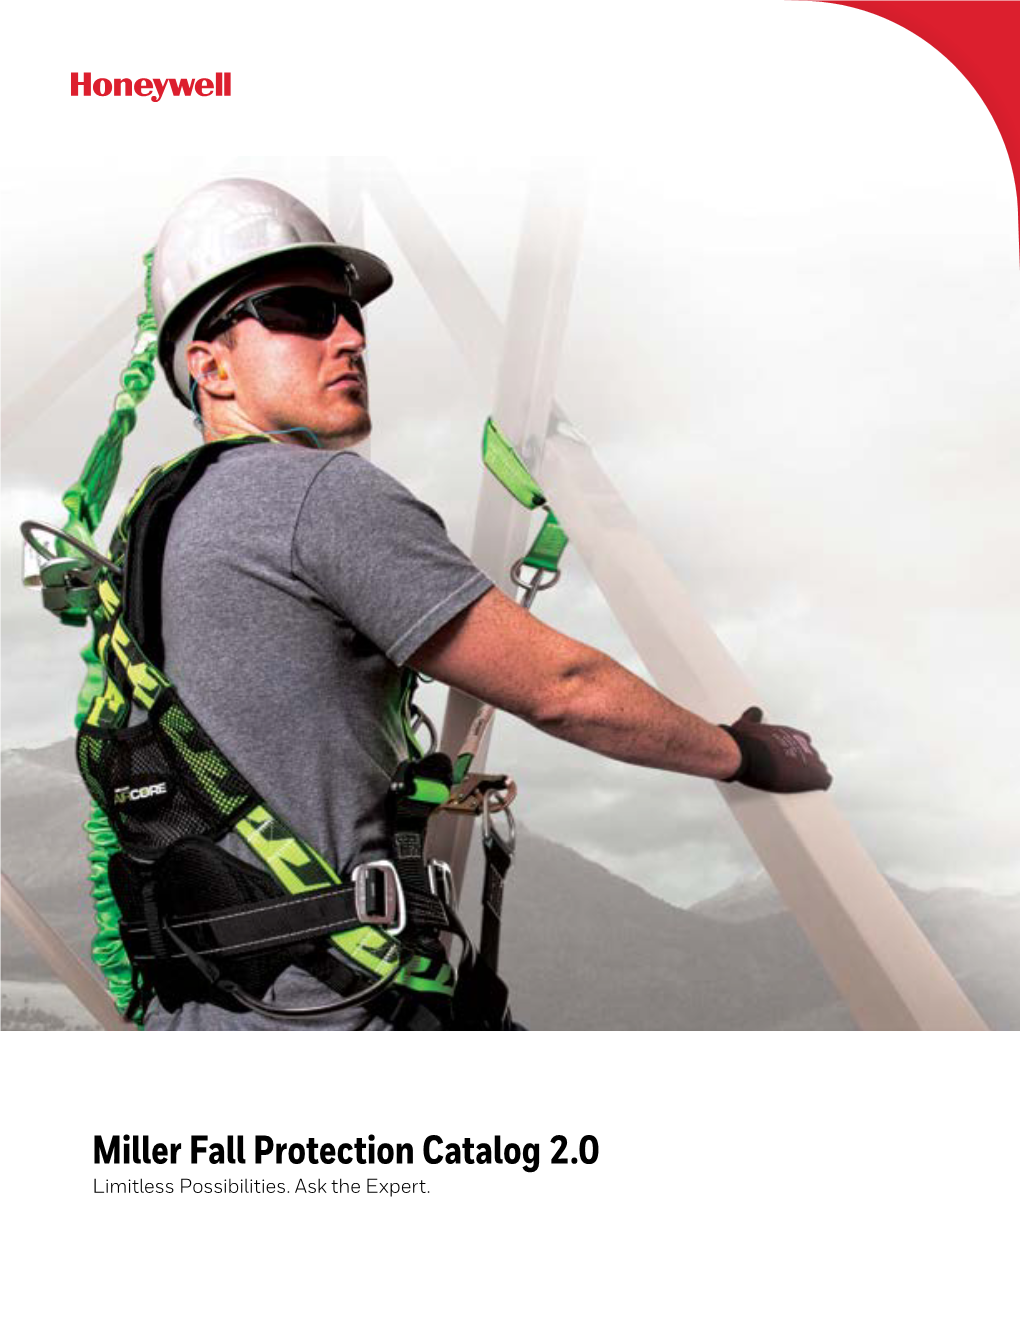 Miller Fall Protection Catalog 2.0 Limitless Possibilities